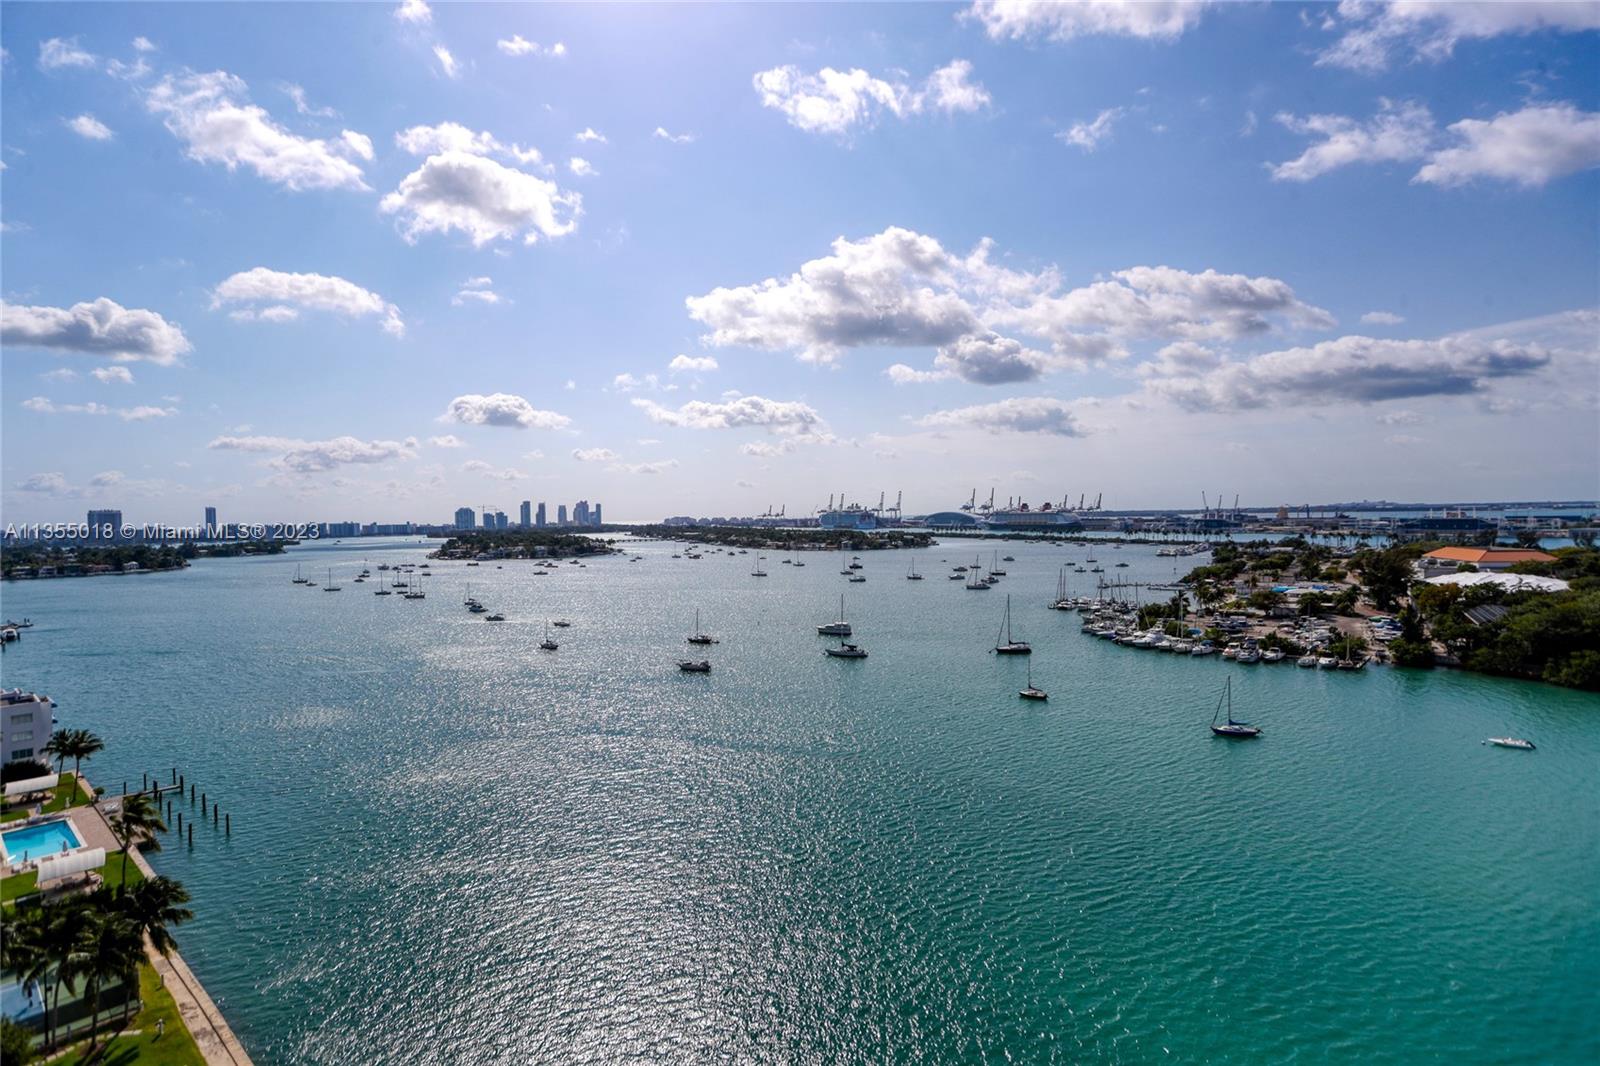 Beautifully updated unit with spectacular views, allow yourself to take in the beauty of this fully furnished 3bedroom/2.5 bath condo with designer kitchen, baths & furnishings and the most magnificent endless views of Biscayne Bay, Miami Beach and downtown Miami! You can relax serenely on the balcony or eat Al fresco while you watch the sailboats go by or simply relax at night to the view of Miami's city lights and skyline. Feel Miami's energy here at The Venetian and enjoy all the scrumptious amenities this building has to offer. One covered parking space and guest parking, security and more. Pets are allowed at owner & Condo board's discretion.